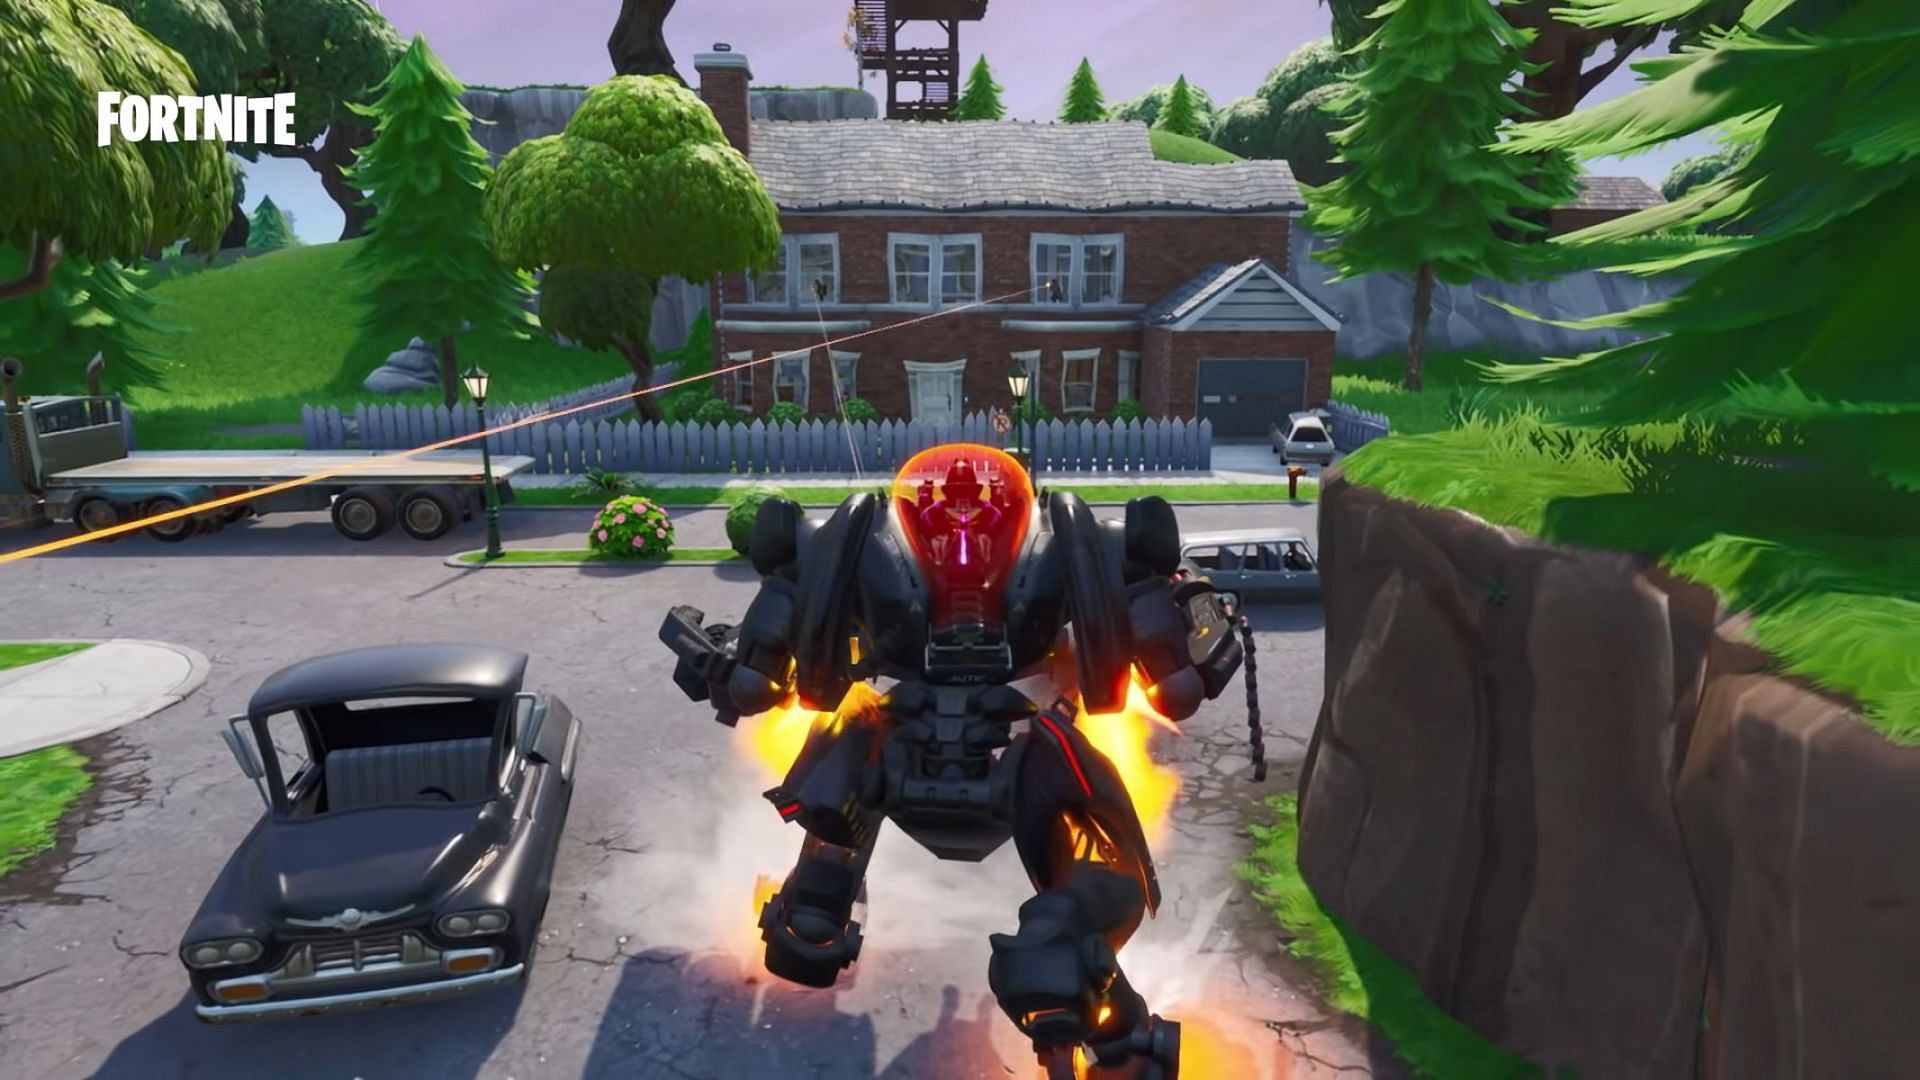 Dread it, run from it, the Fortnite Mech arrives all the same (Image via Fortnite/Epic Games)